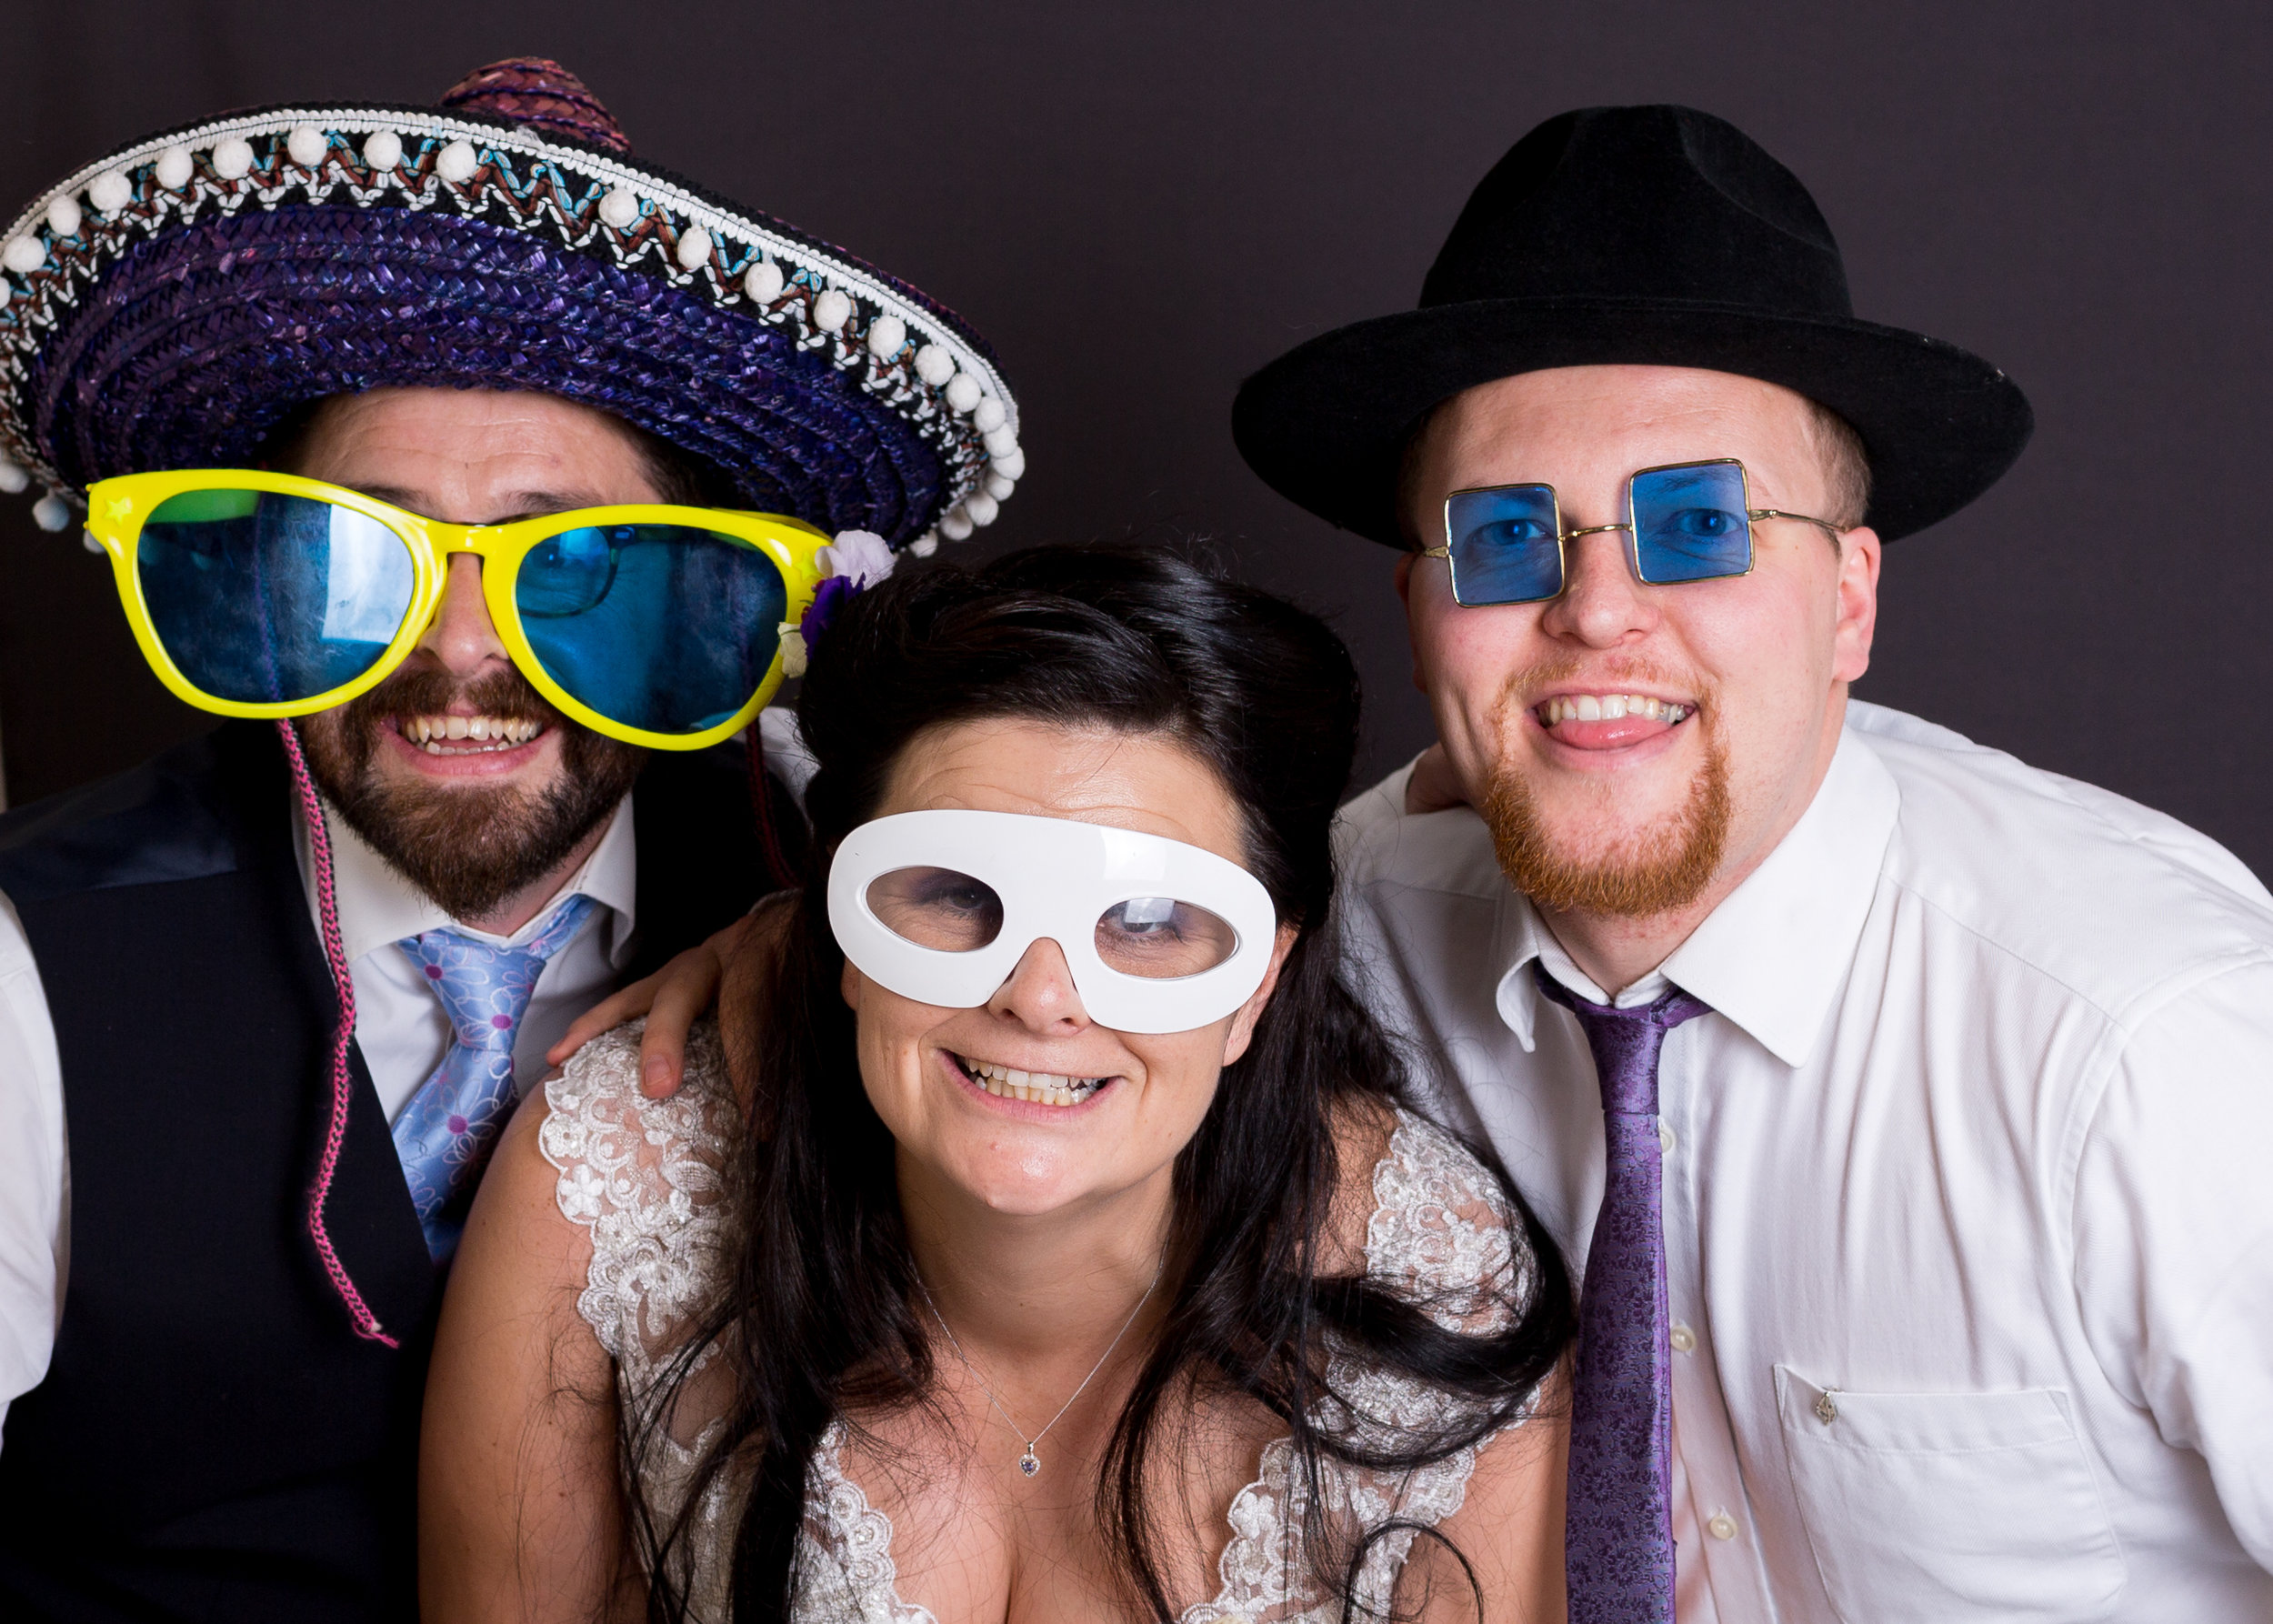 fun wedding photos. Booth and photographer south wales